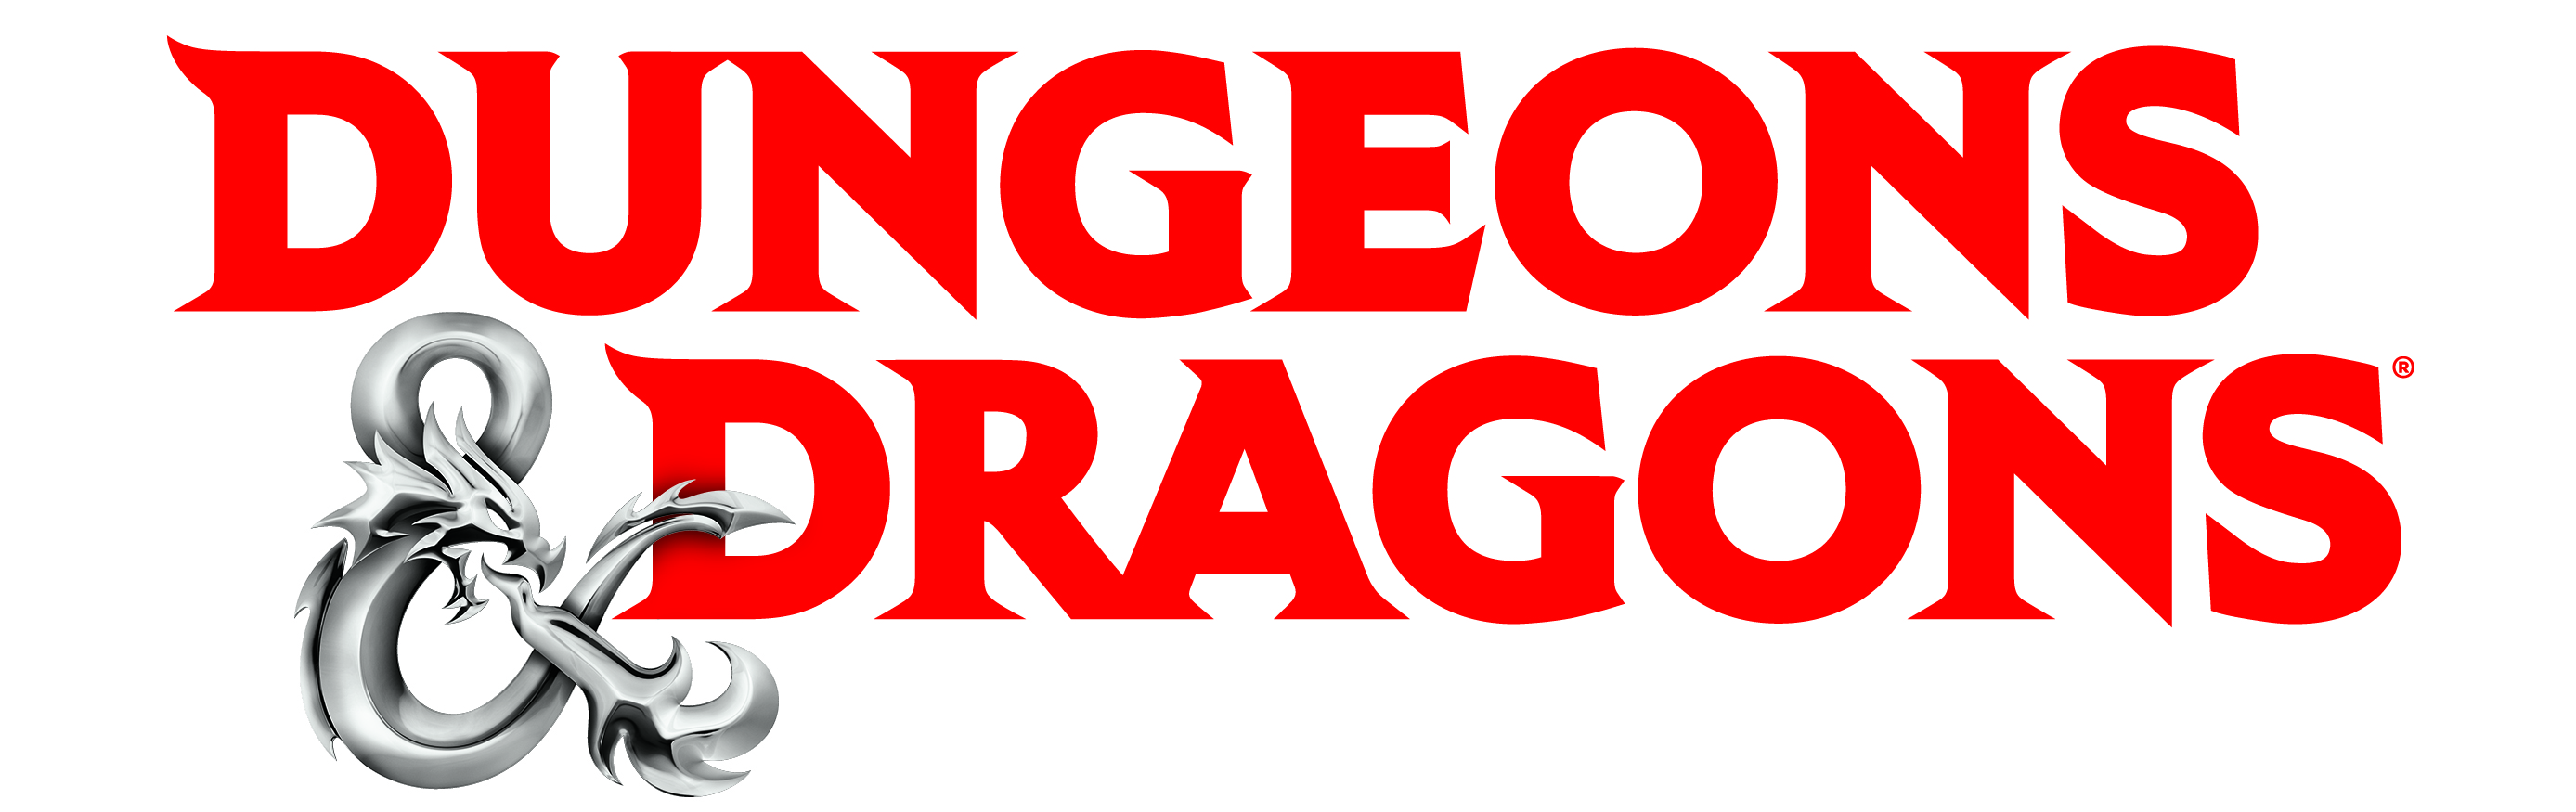 Dungeons and Dragons logo Wallpaper